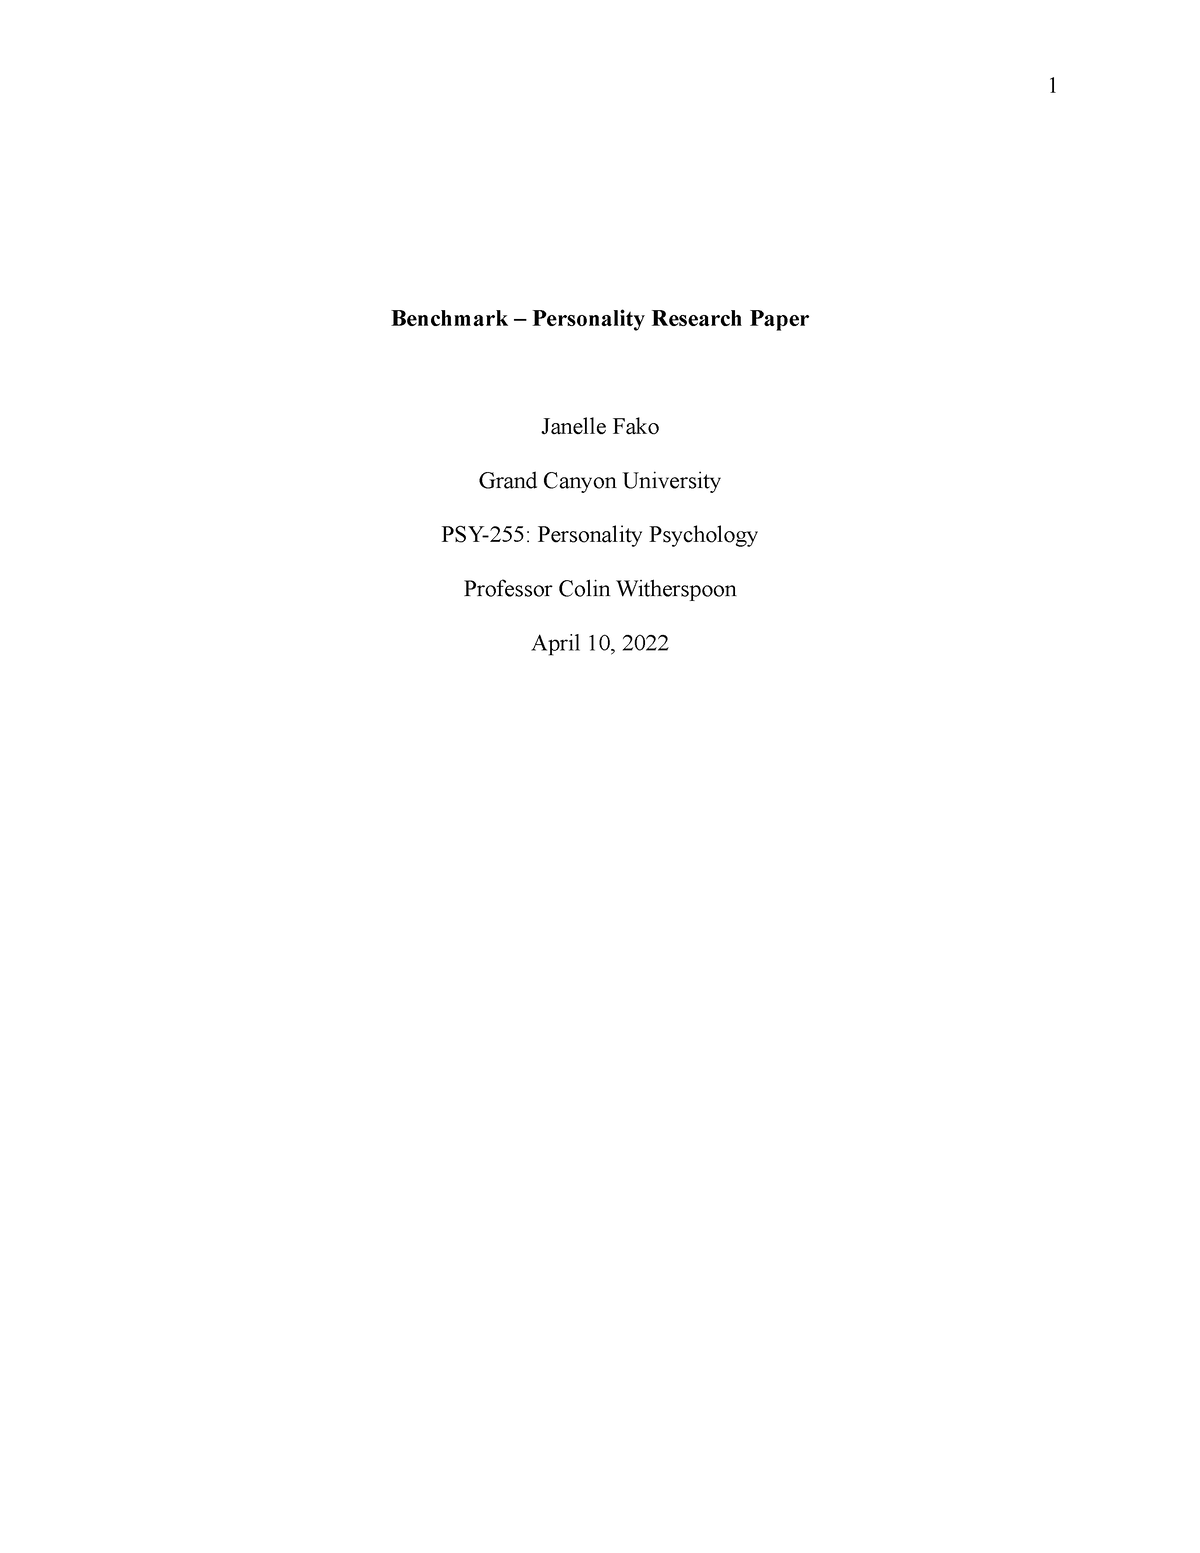 benchmark personality research paper psy 255